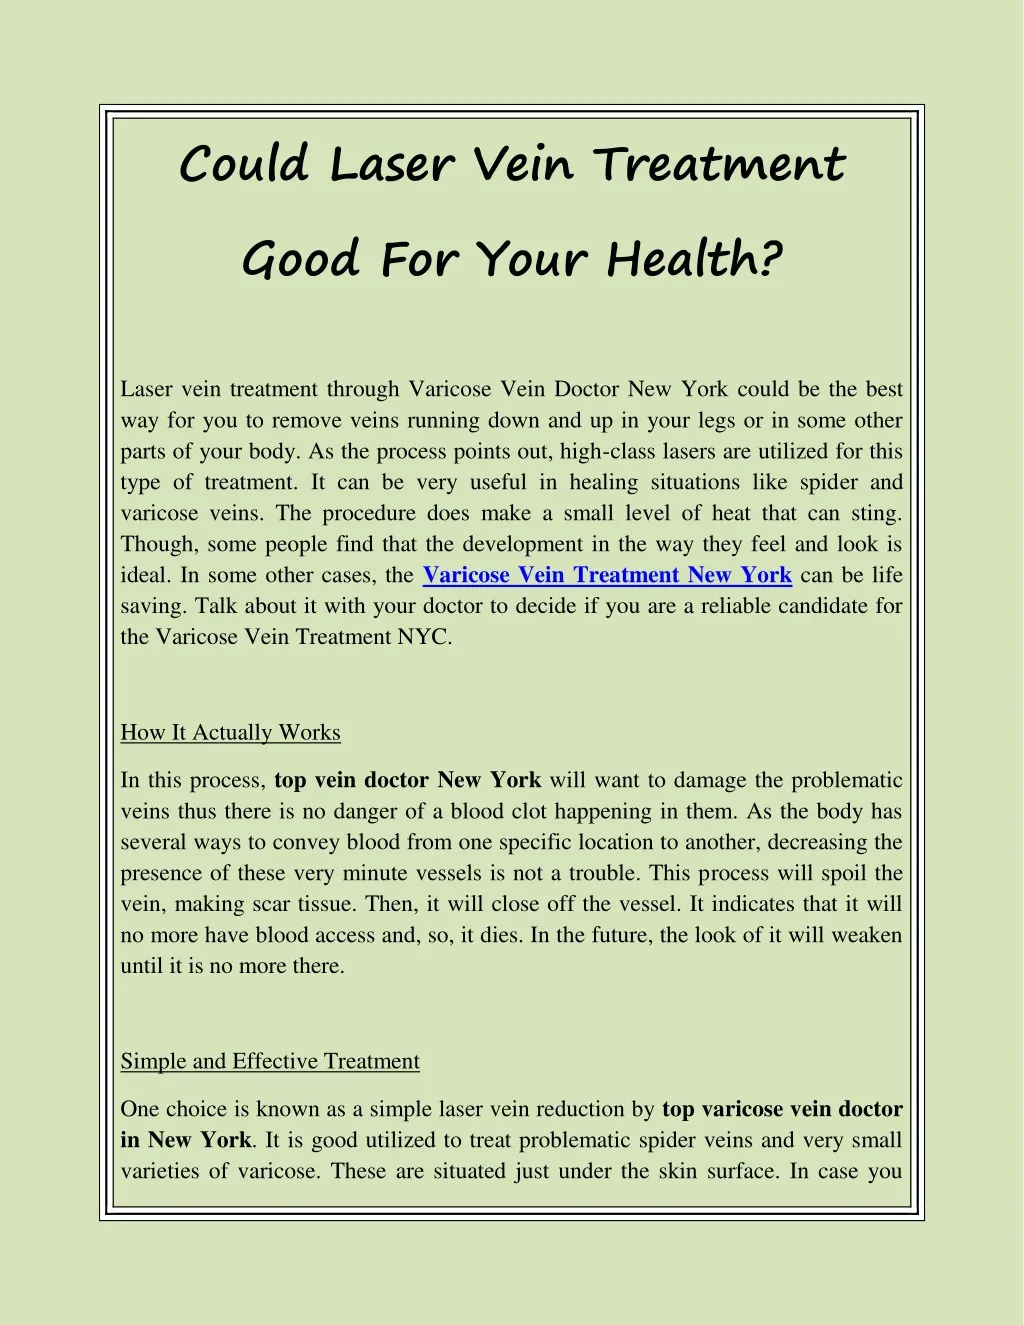 could laser vein treatment good for your health